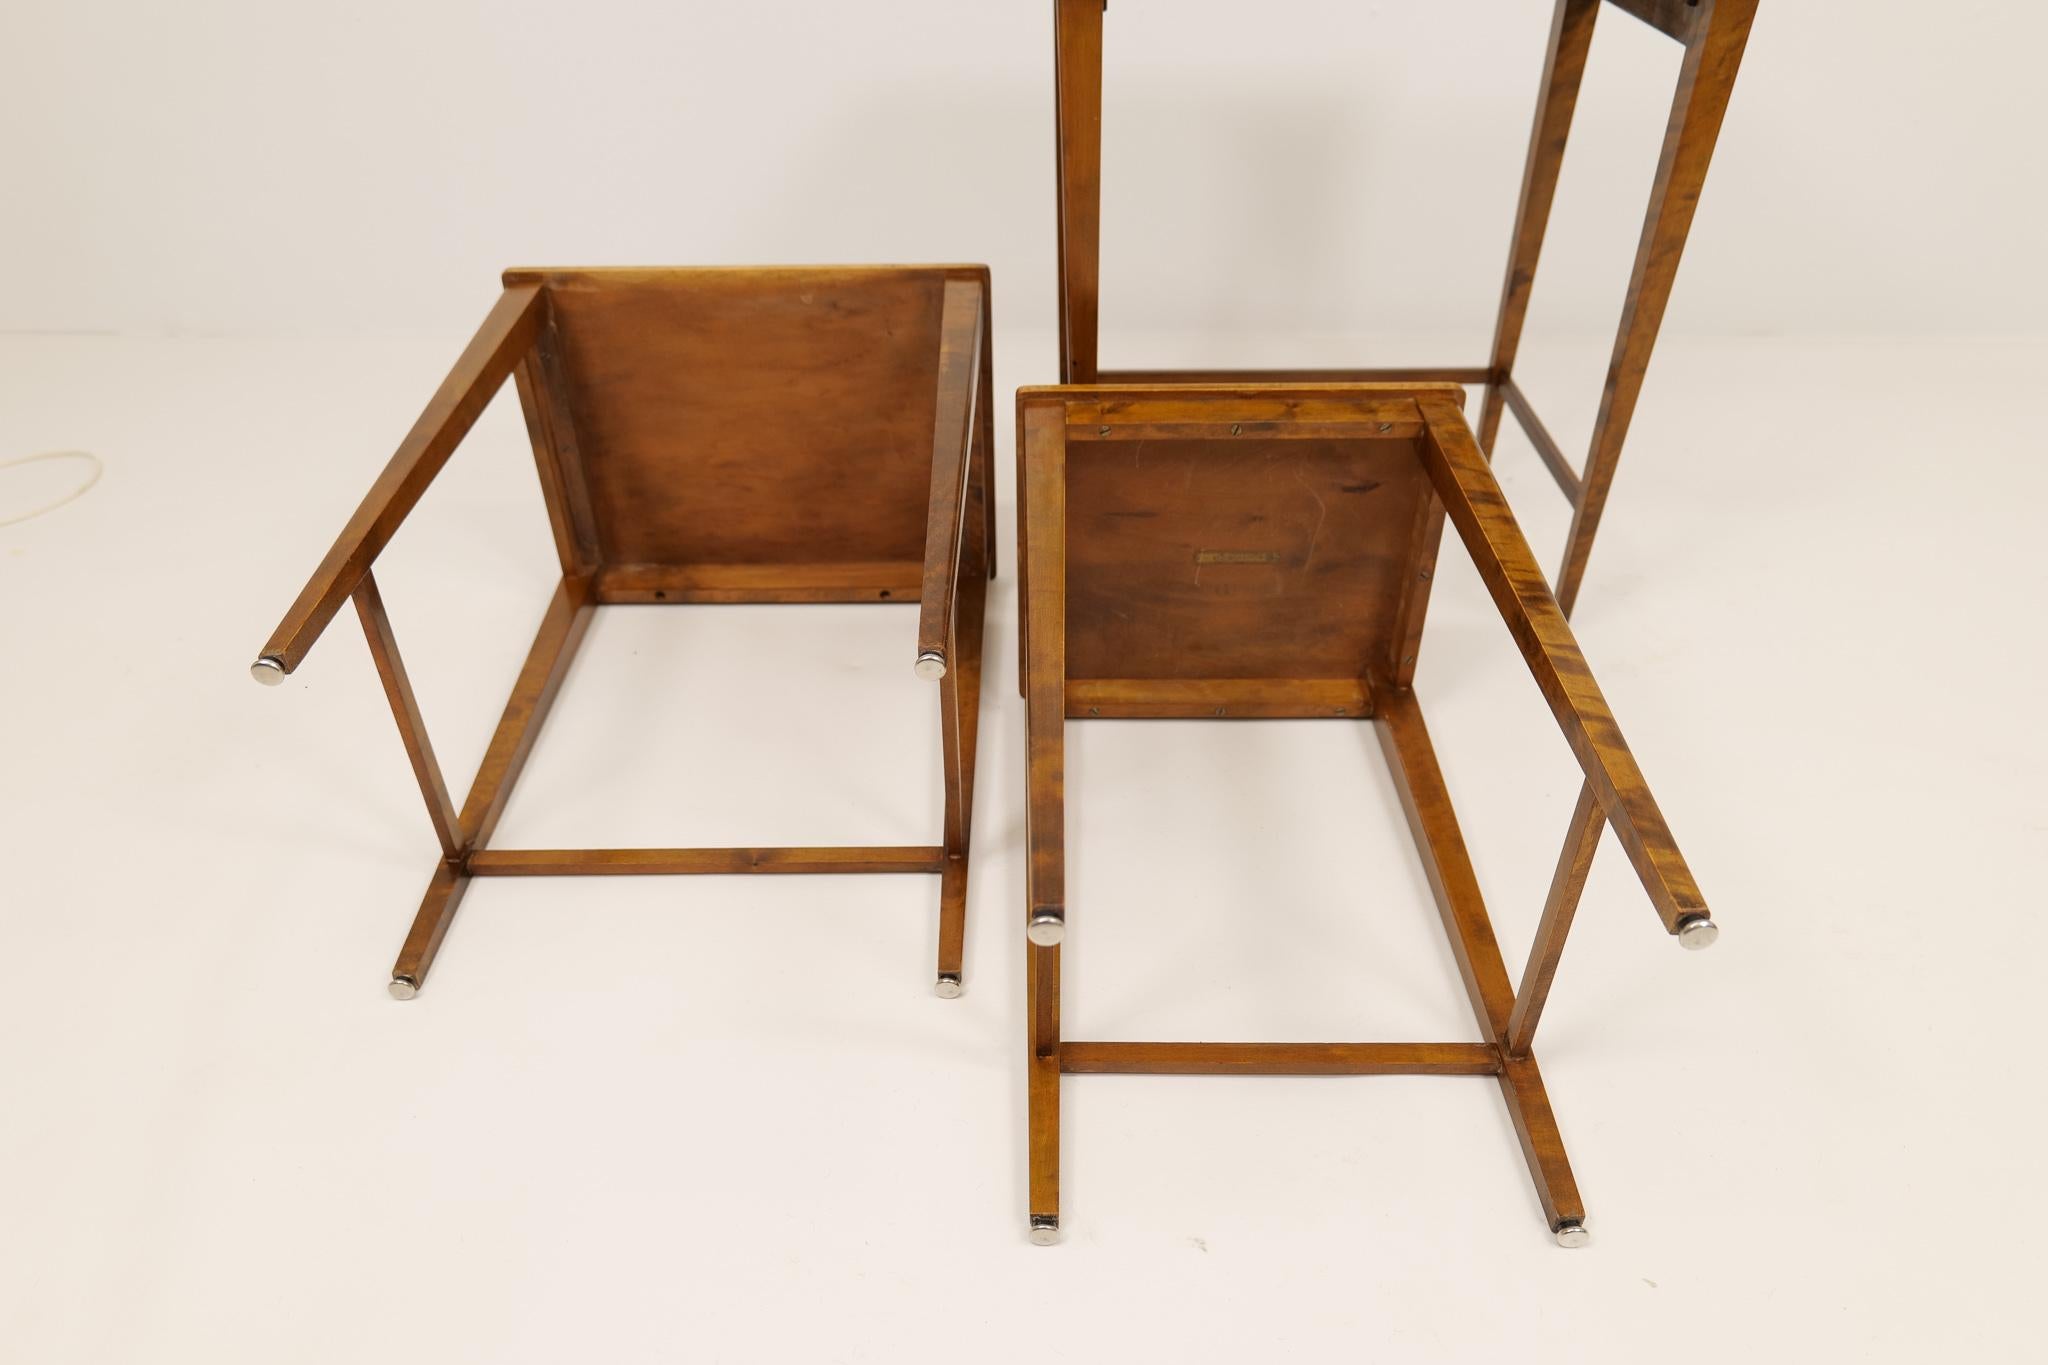 Art Deco Nesting Tables Mahogany and Stained Birch, NK Sweden, 1940s For Sale 10